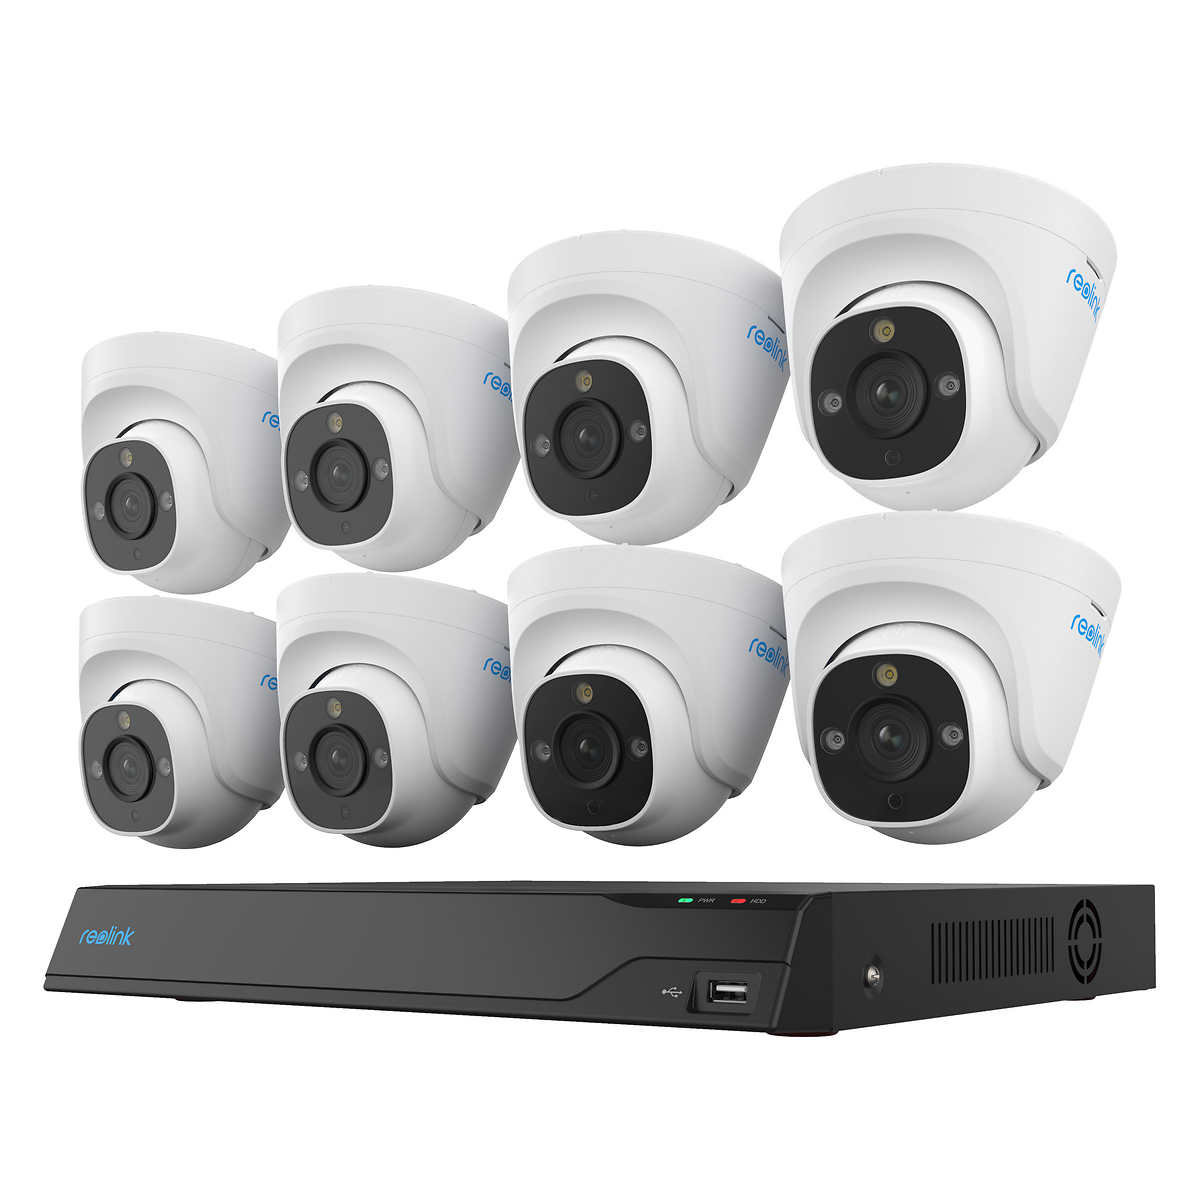 Reolink 12MP 8 dome cameras + NVR (16 channel) PoE kit $650